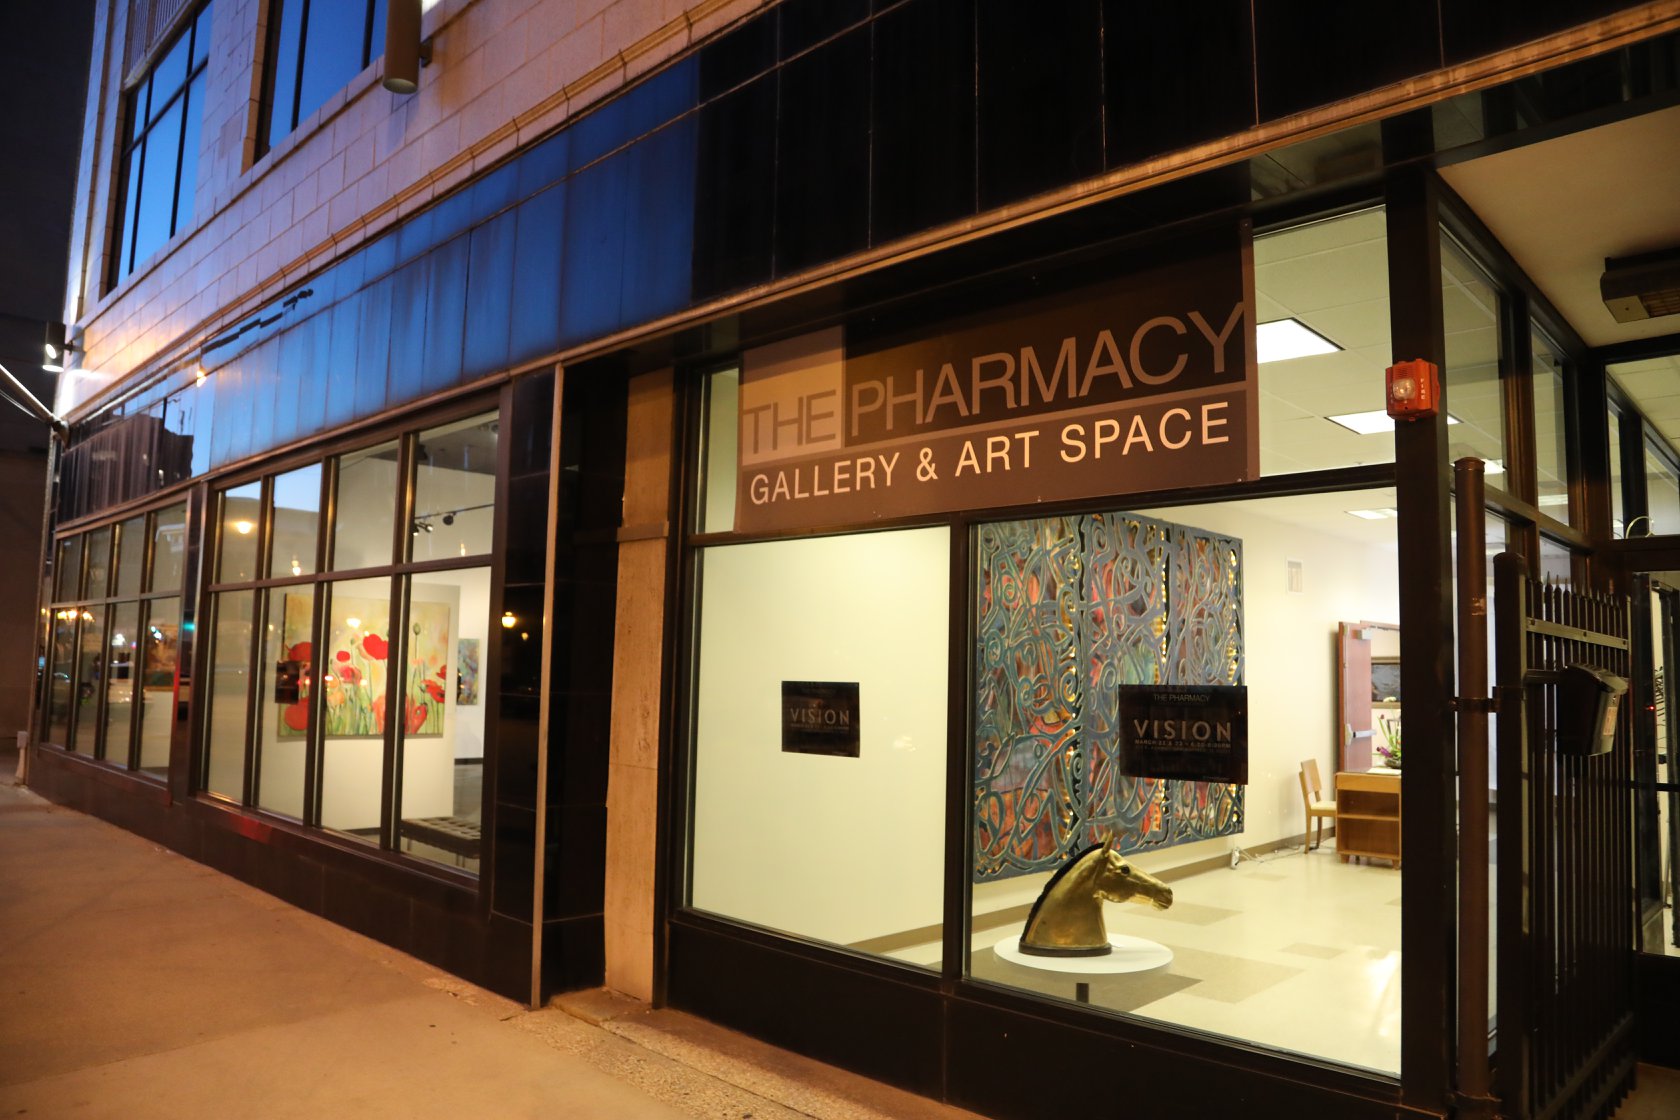 The Pharmacy Gallery & Art Space